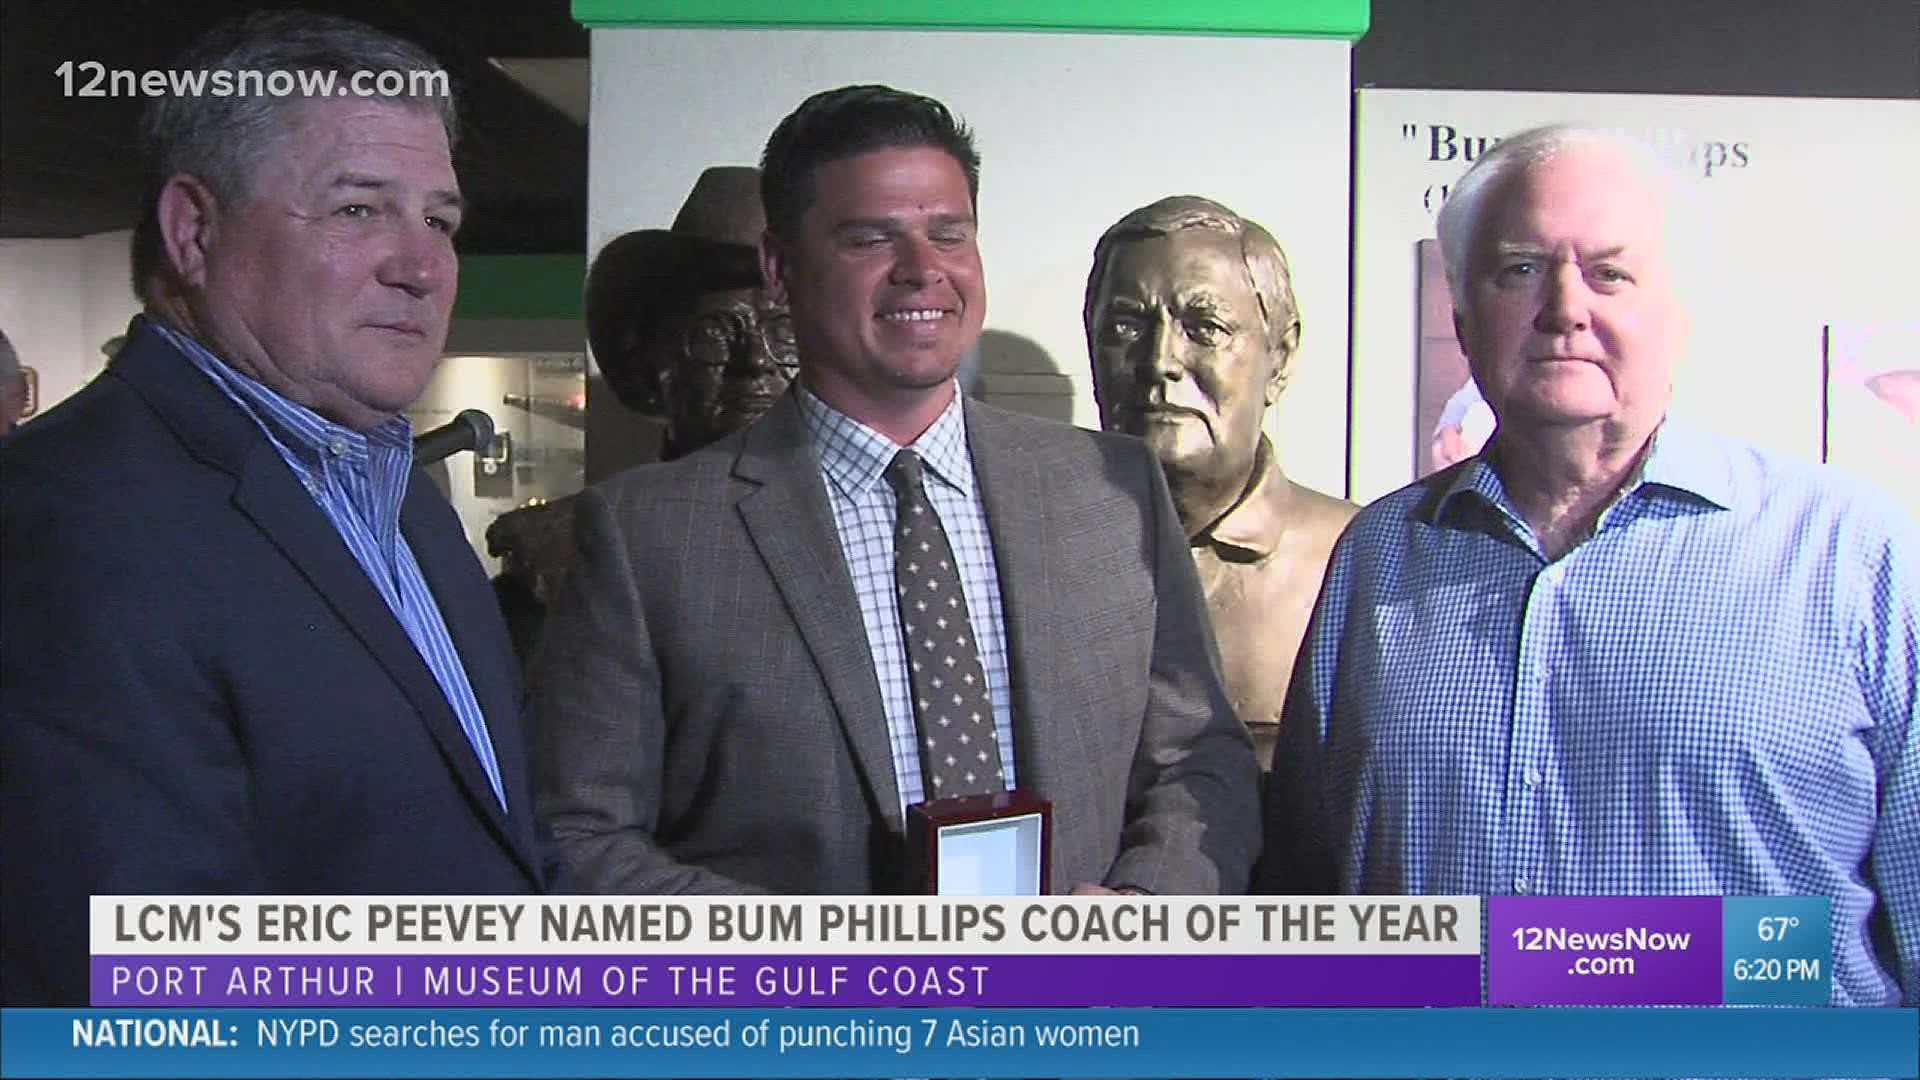 Peevey earns Bum Phillips Coach of The Year Award after ten game turnaround at LCM